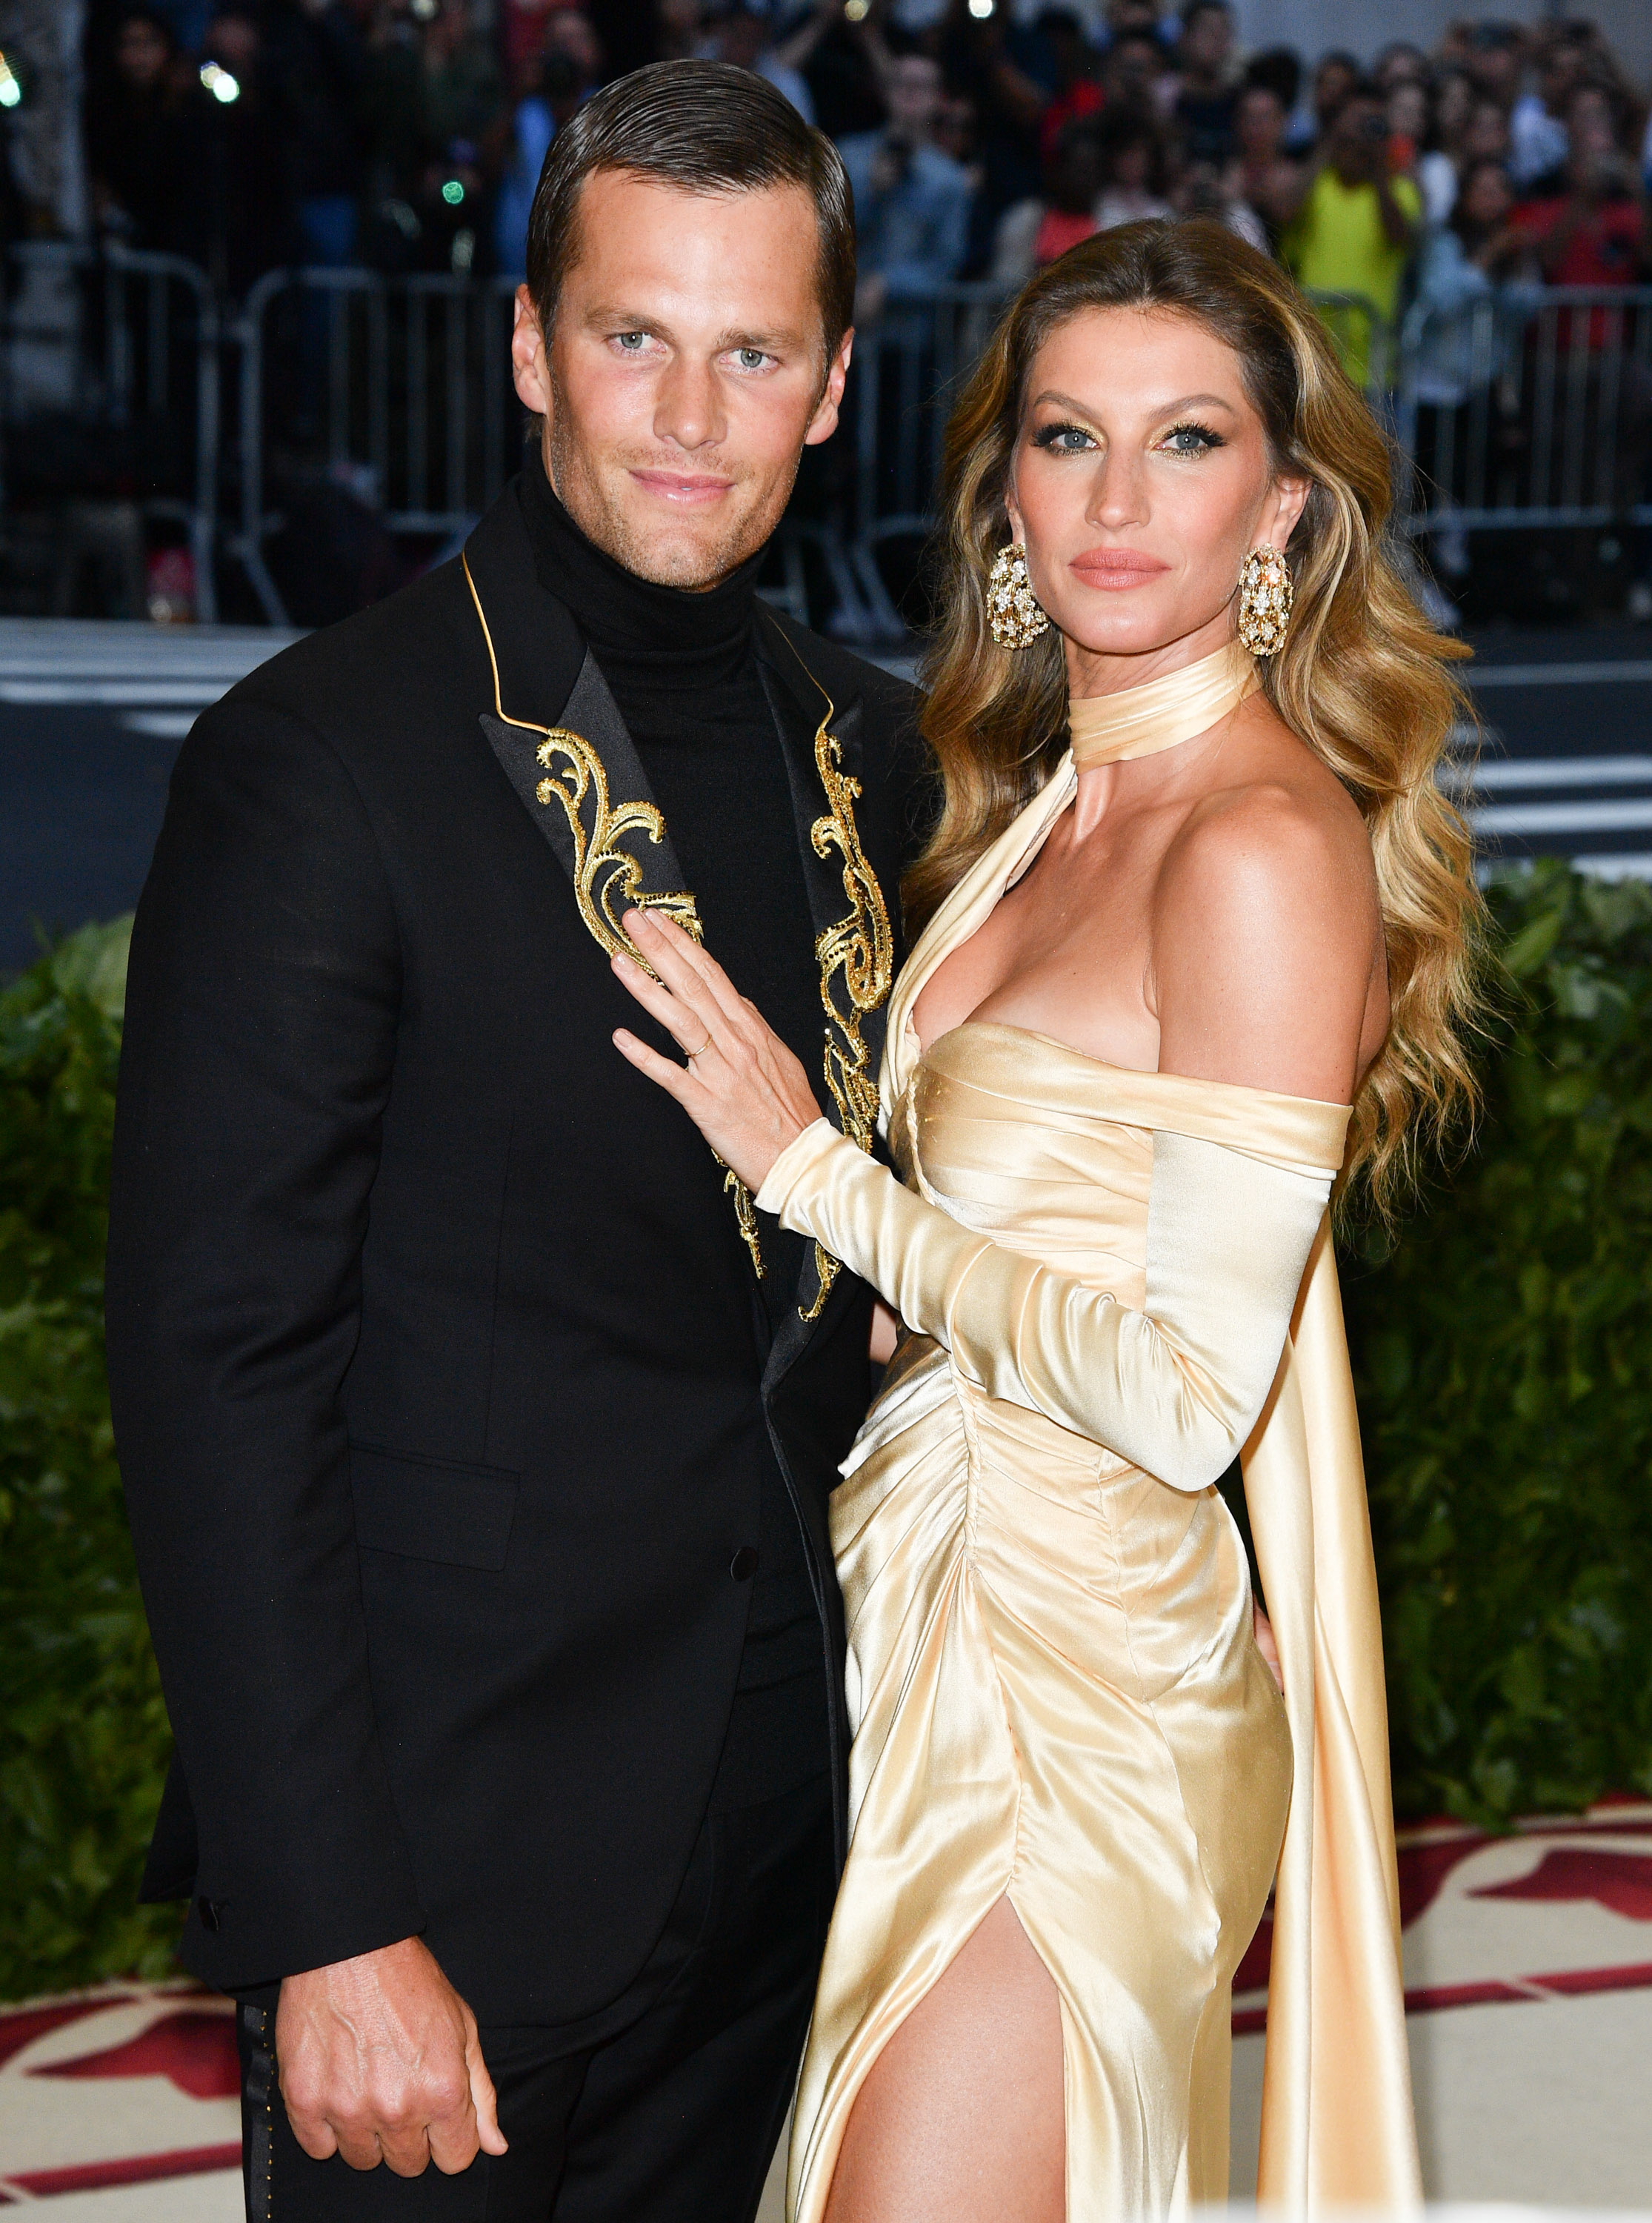 Tom Brady and Gisele Bündchen at the Met Gala in New York City on May 7, 2018 | Source: Getty Images